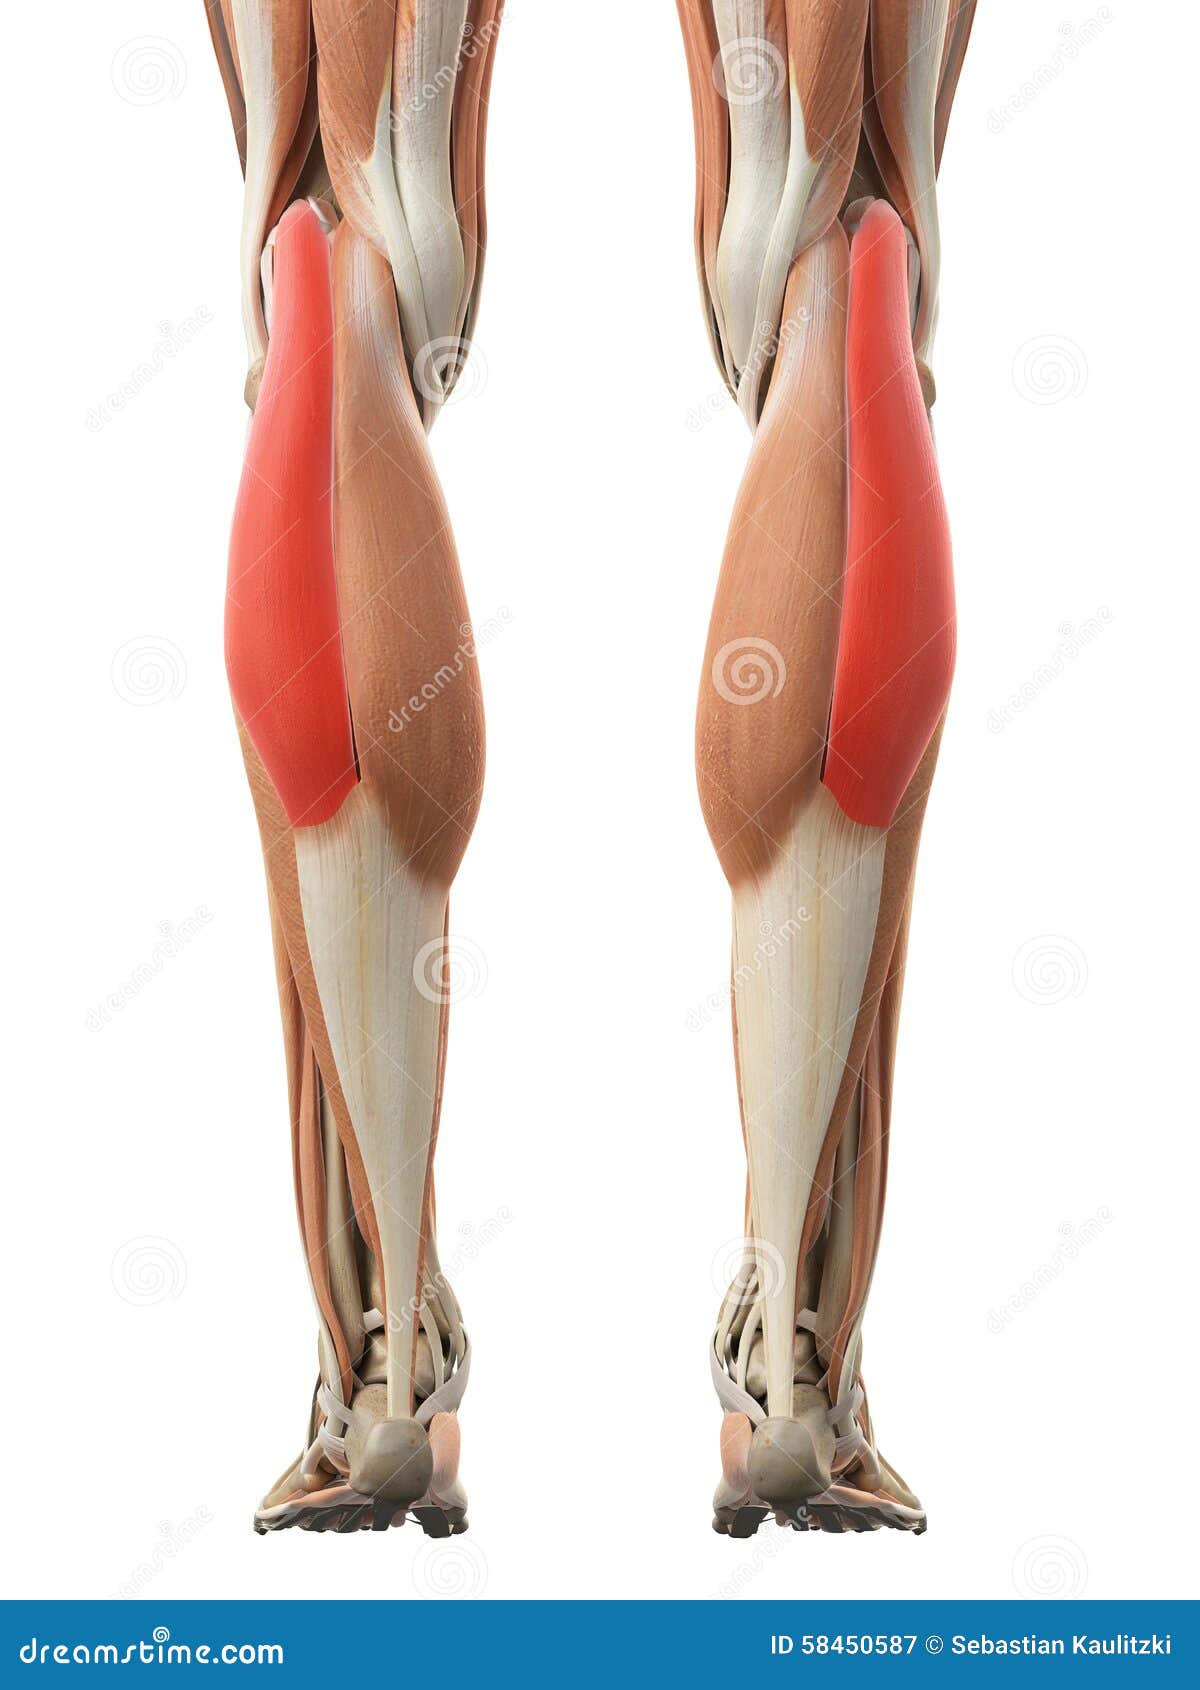 the gastrocnemius lateral head